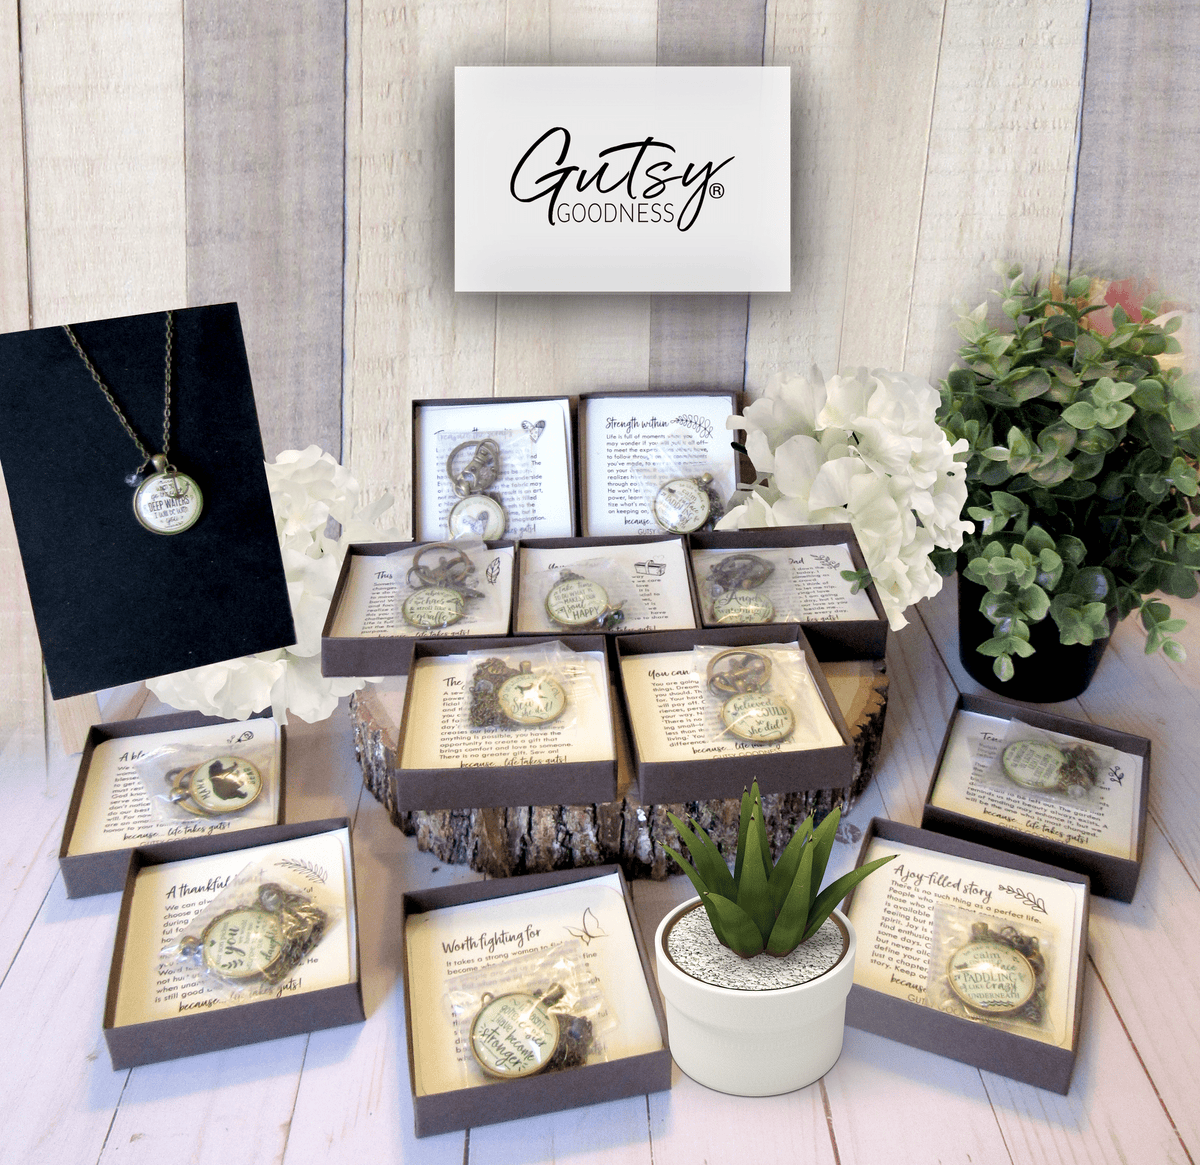 Starter Pack Motivation Collection Handmade Necklaces Assortment Kit Boho Inspired 12 Individual Gift Boxes - Gutsy Goodness